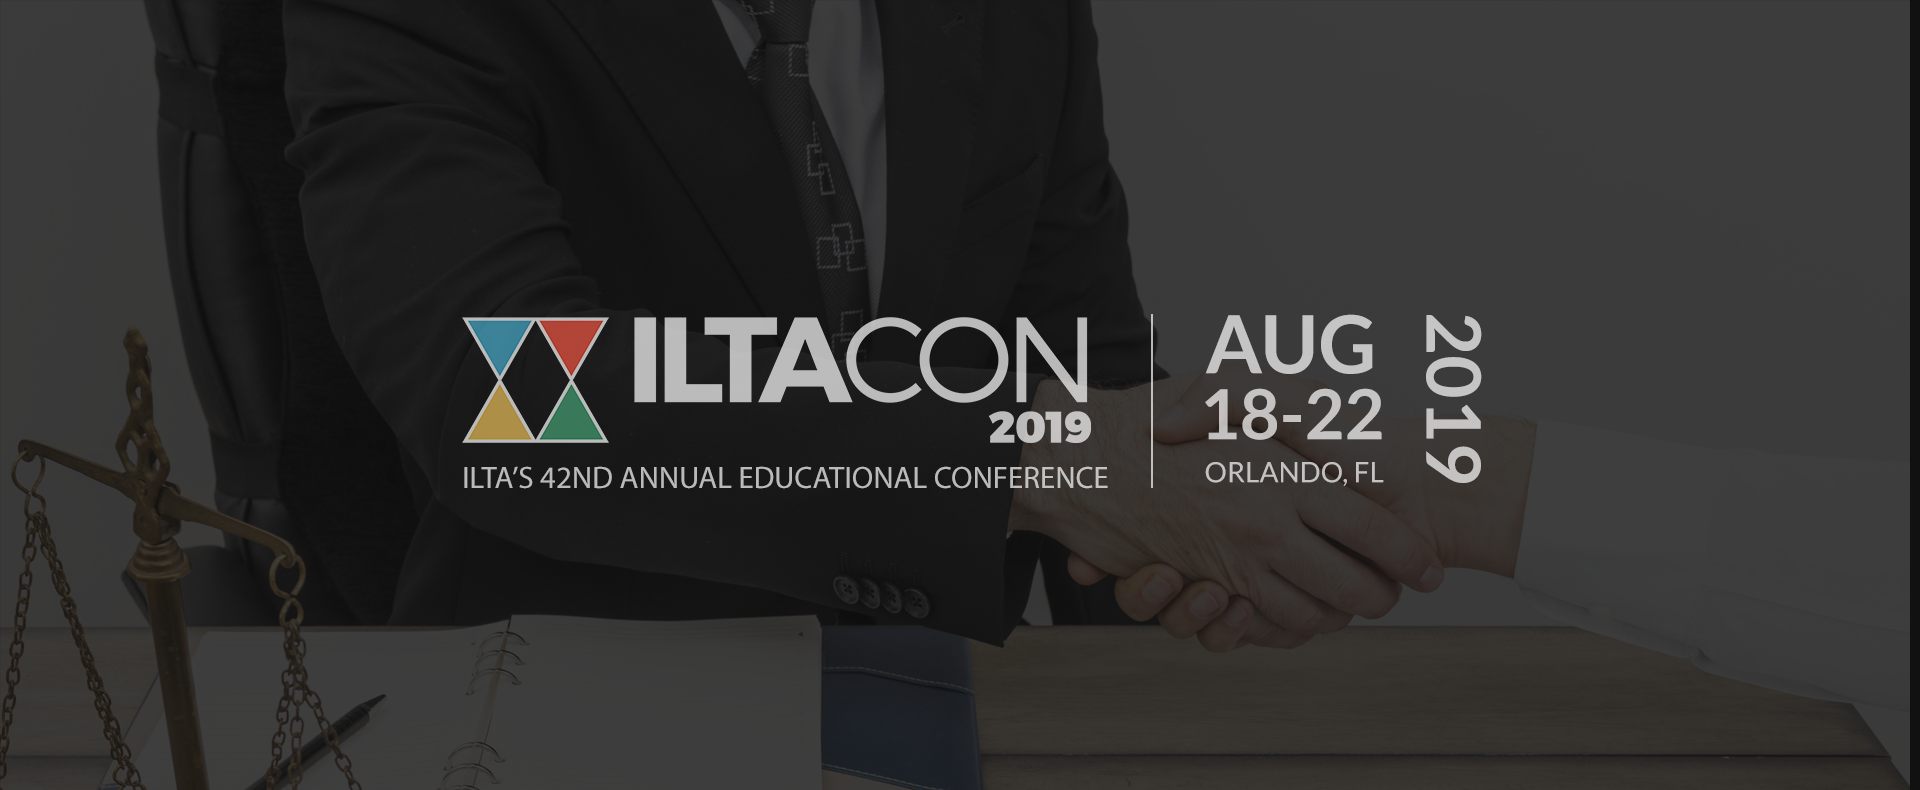 iltacon 2019 - sharepoint consulting services & solutions